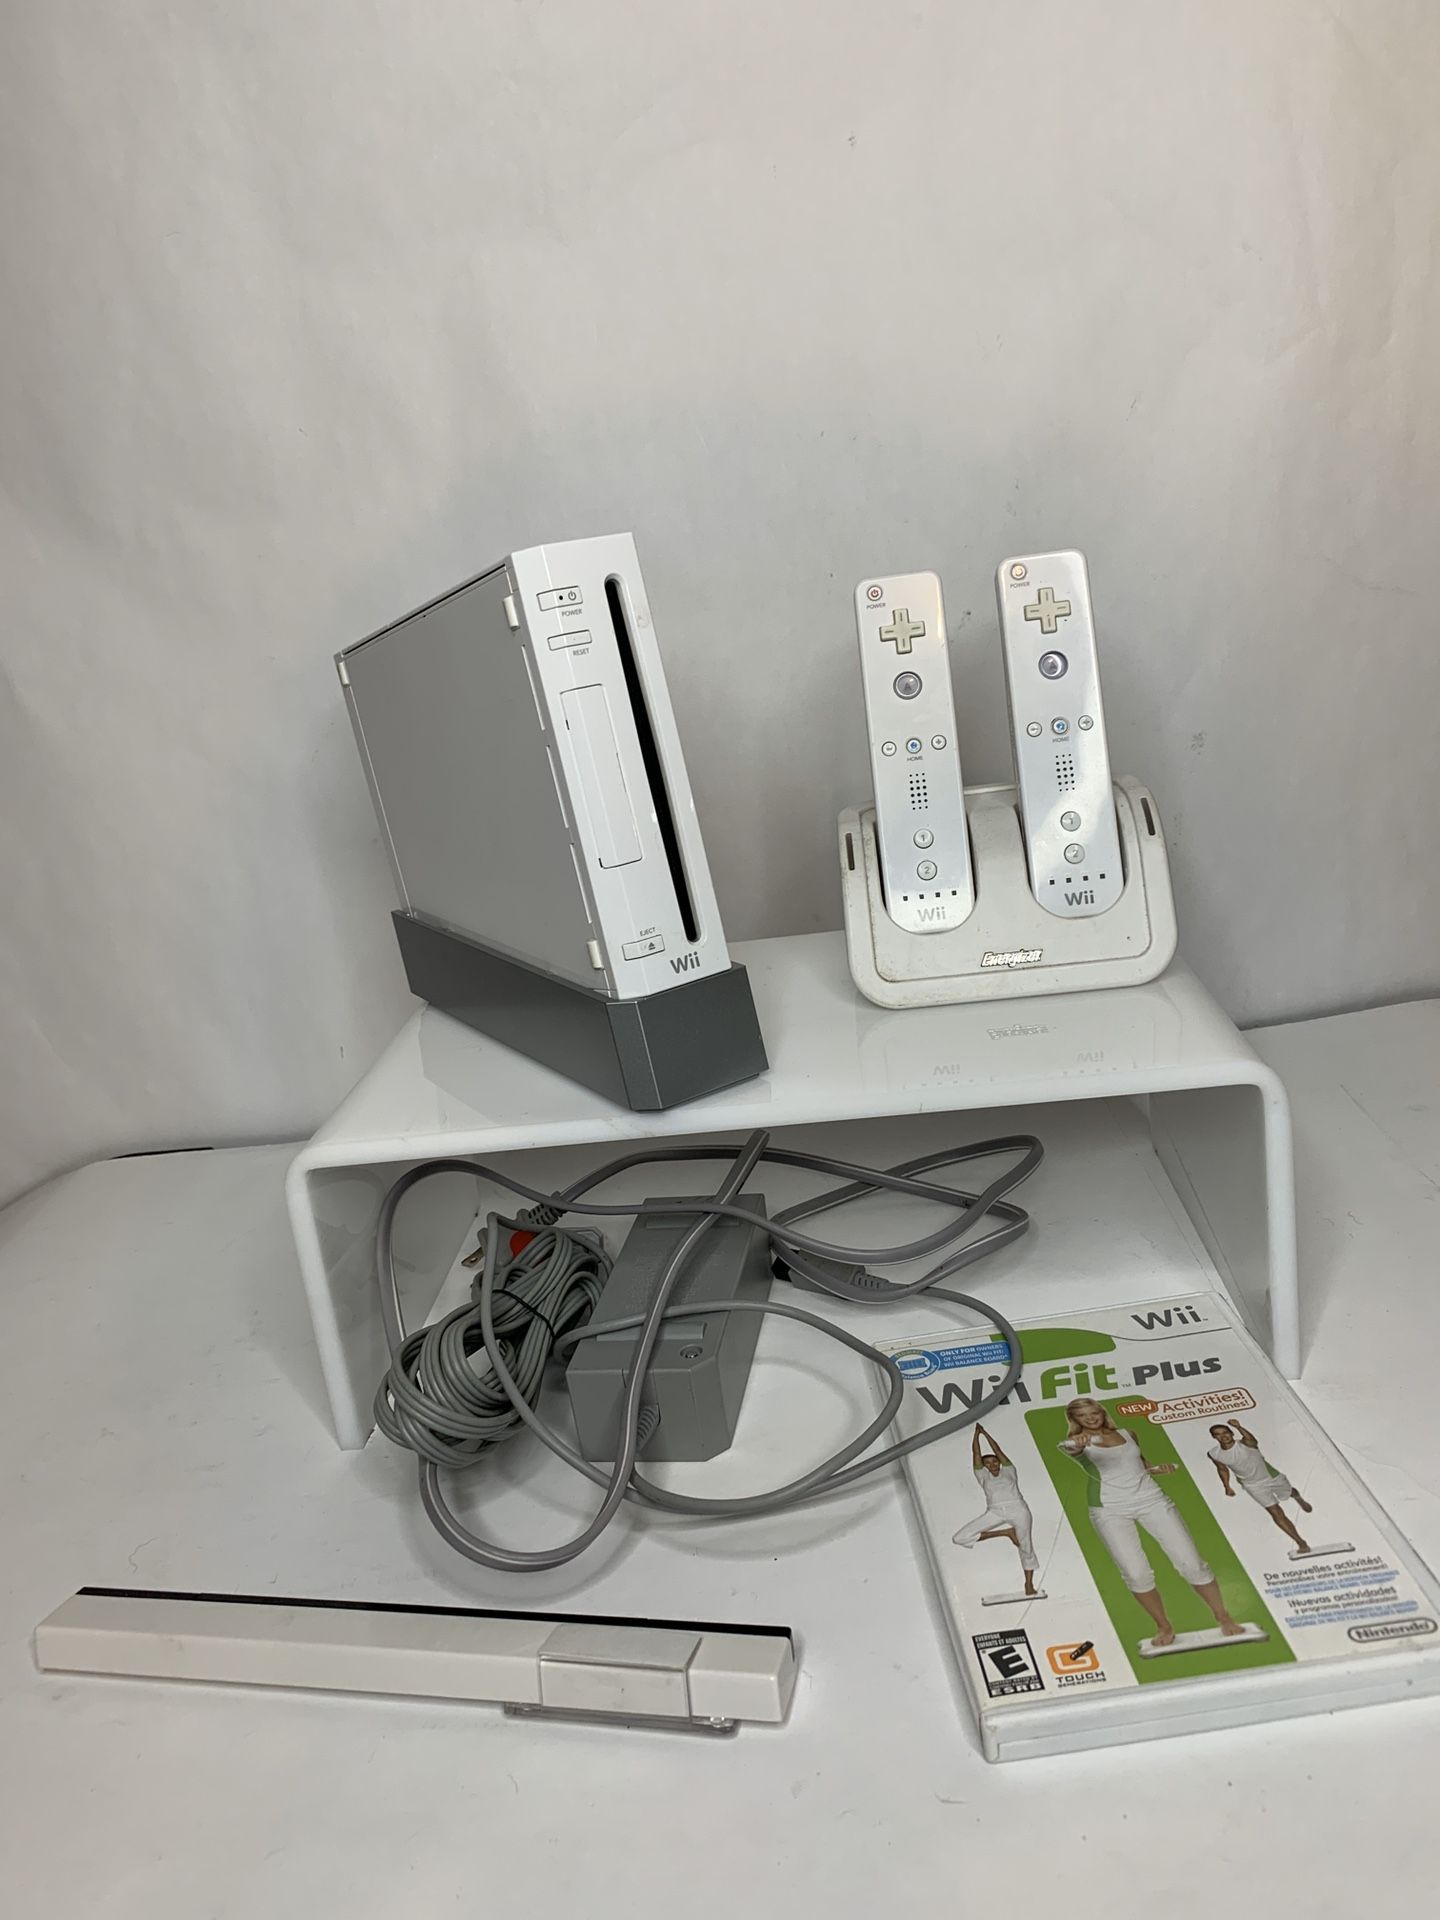 Nintendo wii with controllers and games